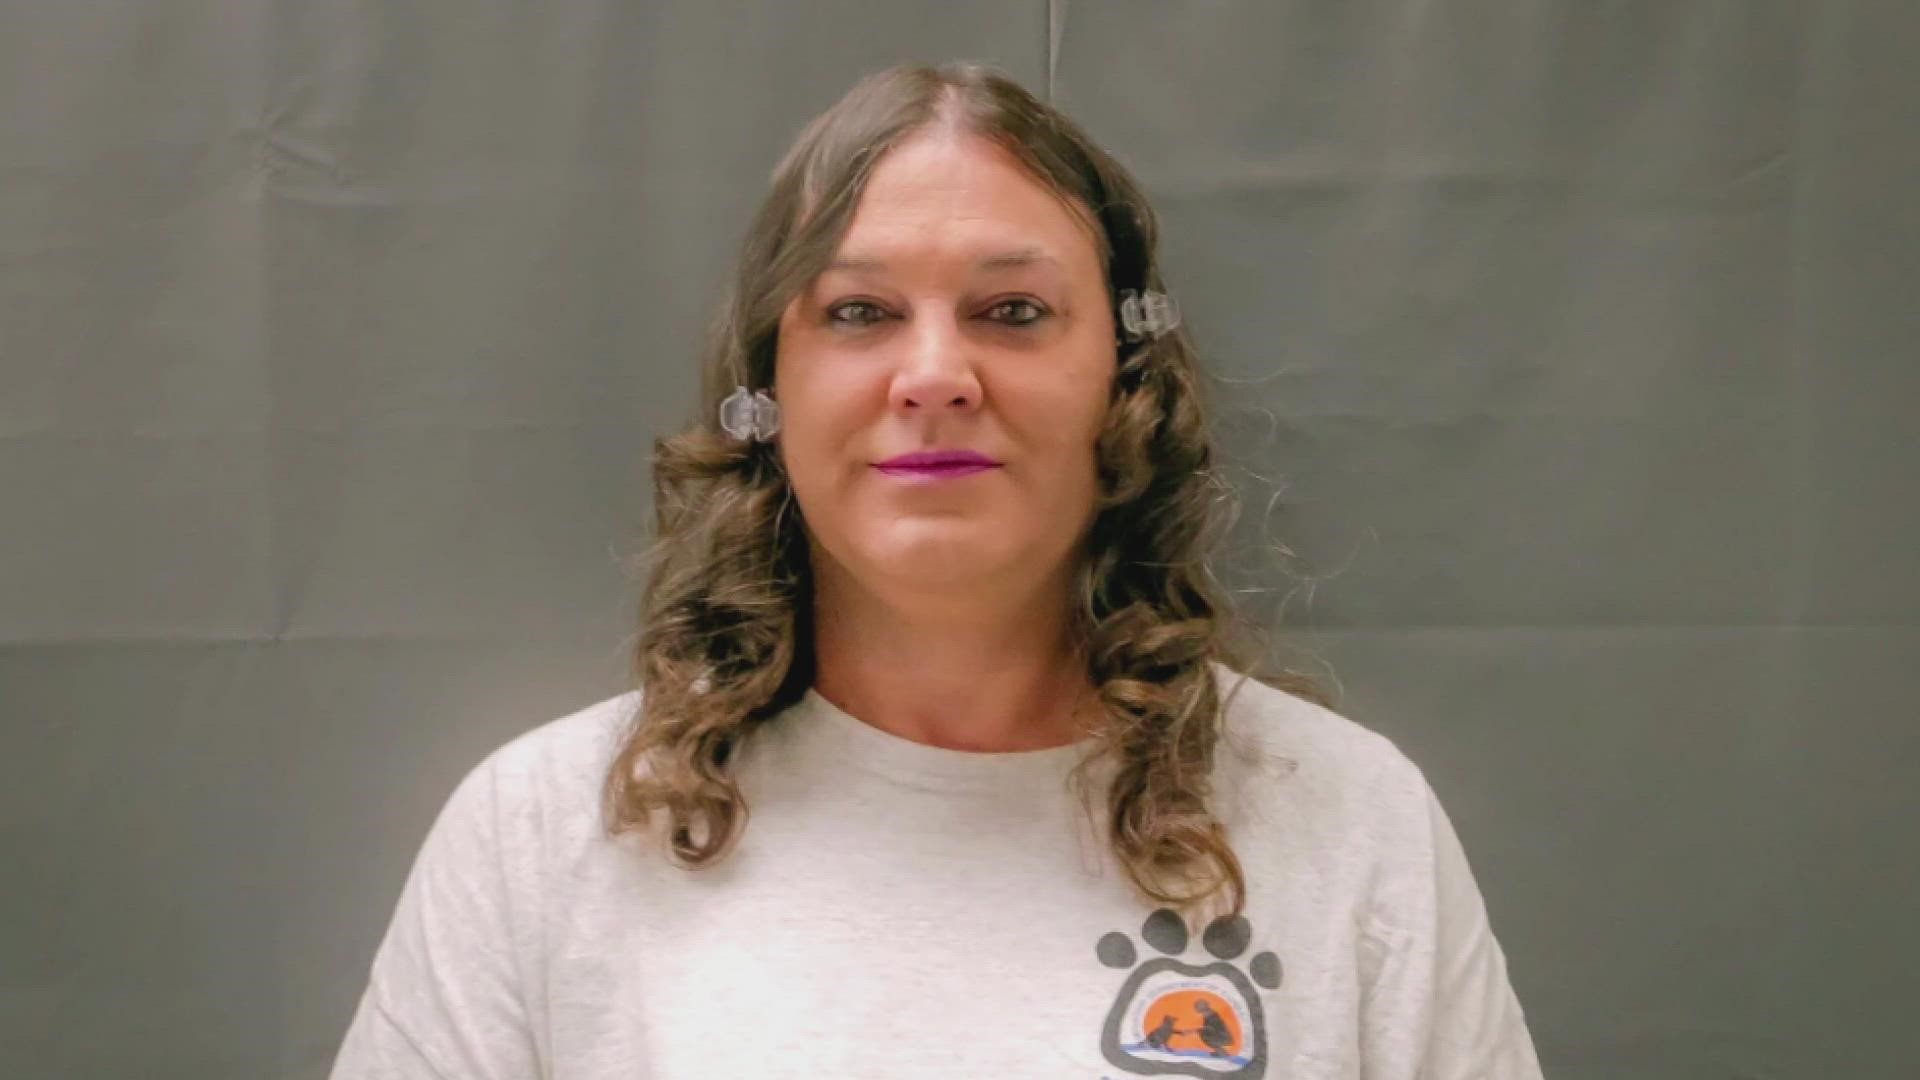 Missouri Gov. Mike Parson denied clemency for Amber McLaughlin. She will be the first openly transgender death row inmate